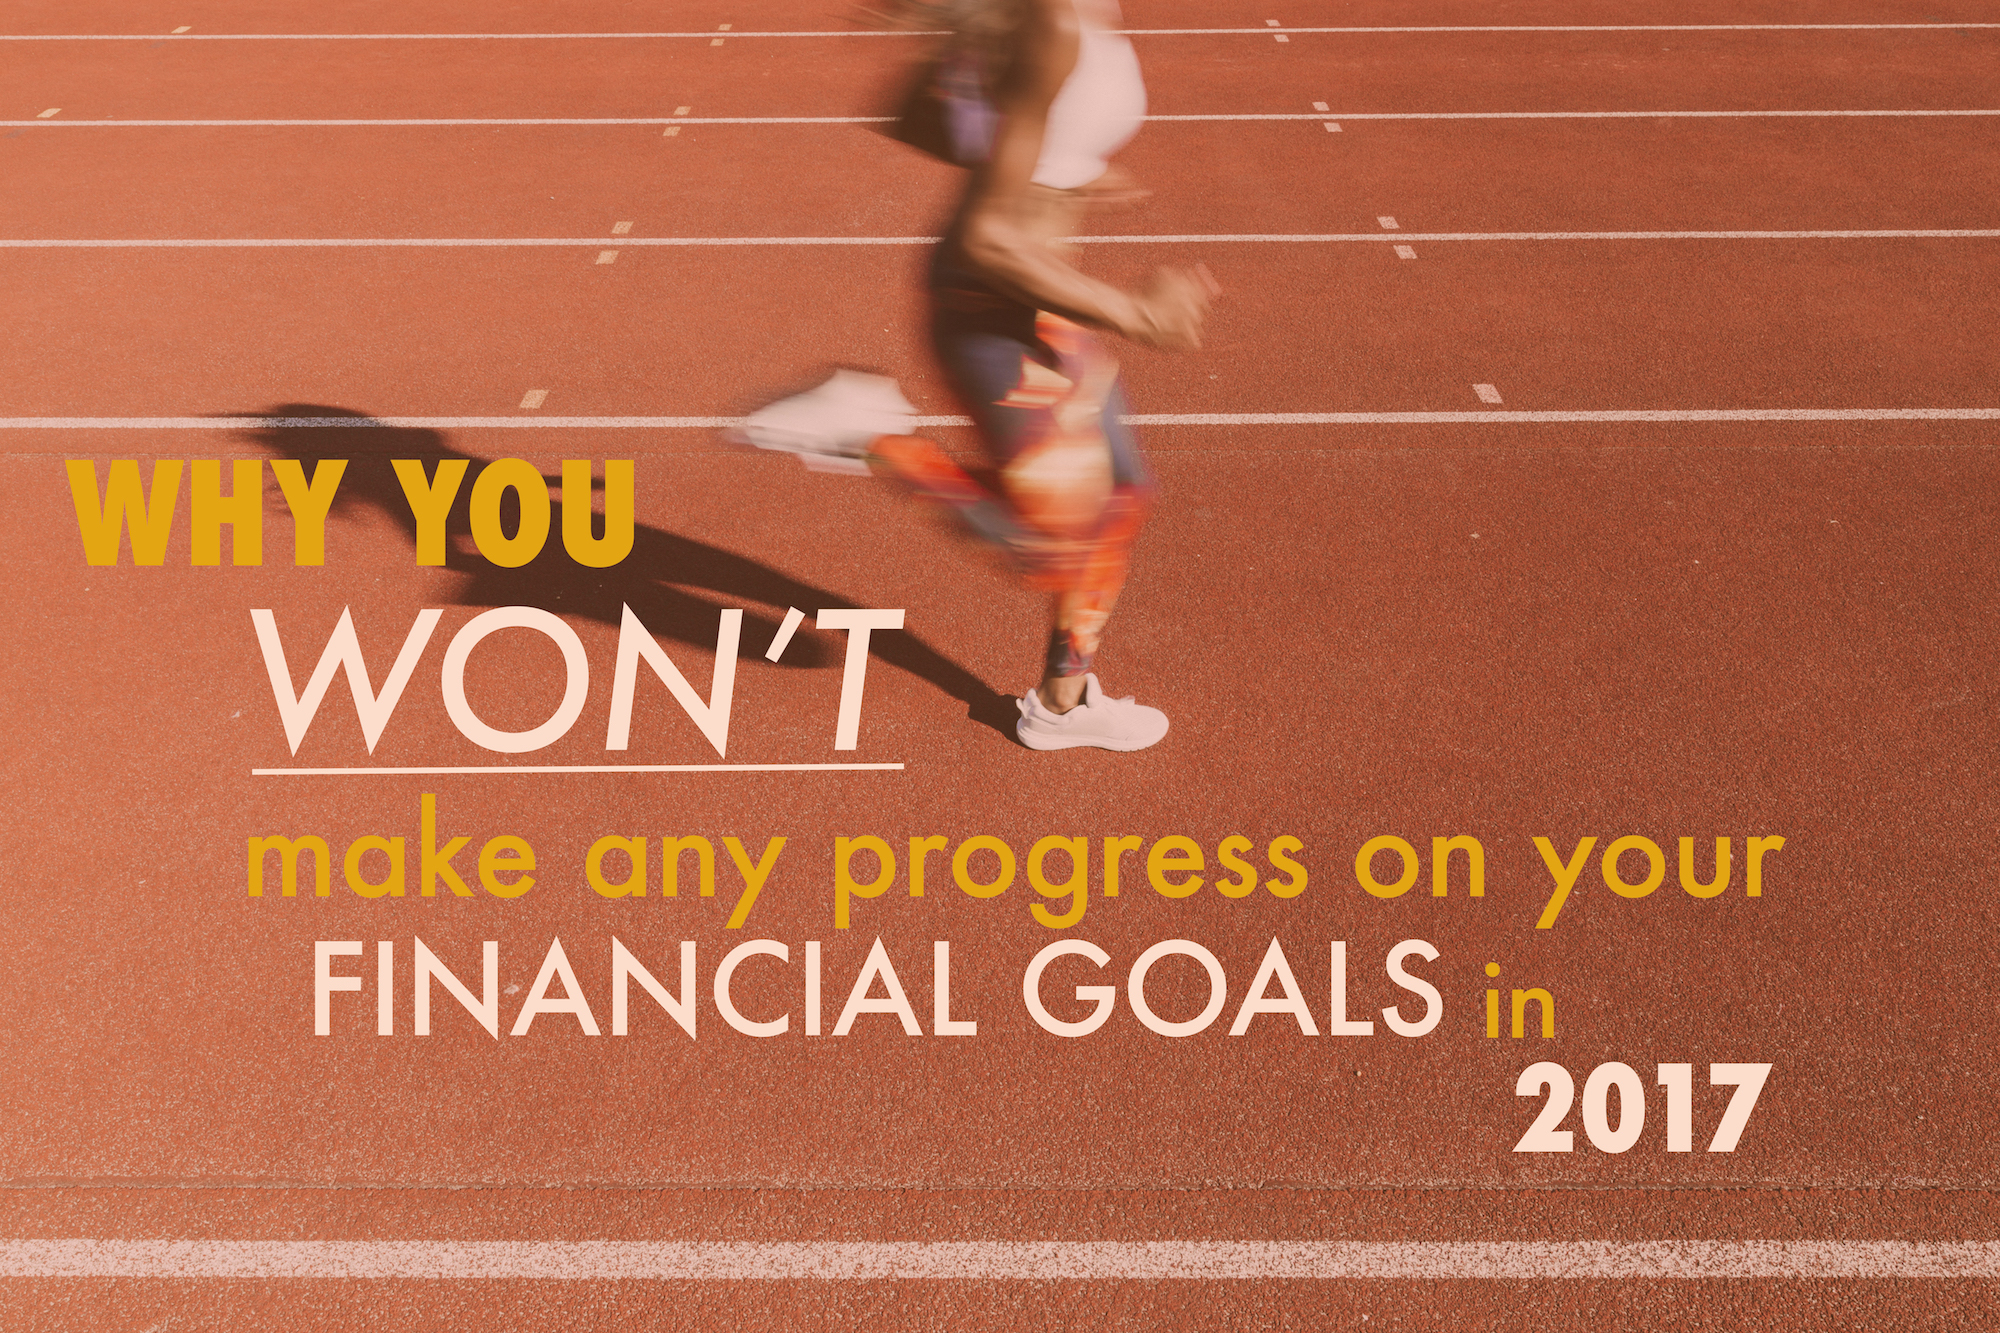 Why You Won’t Make Any Progress on Your Financial Goals in 2017